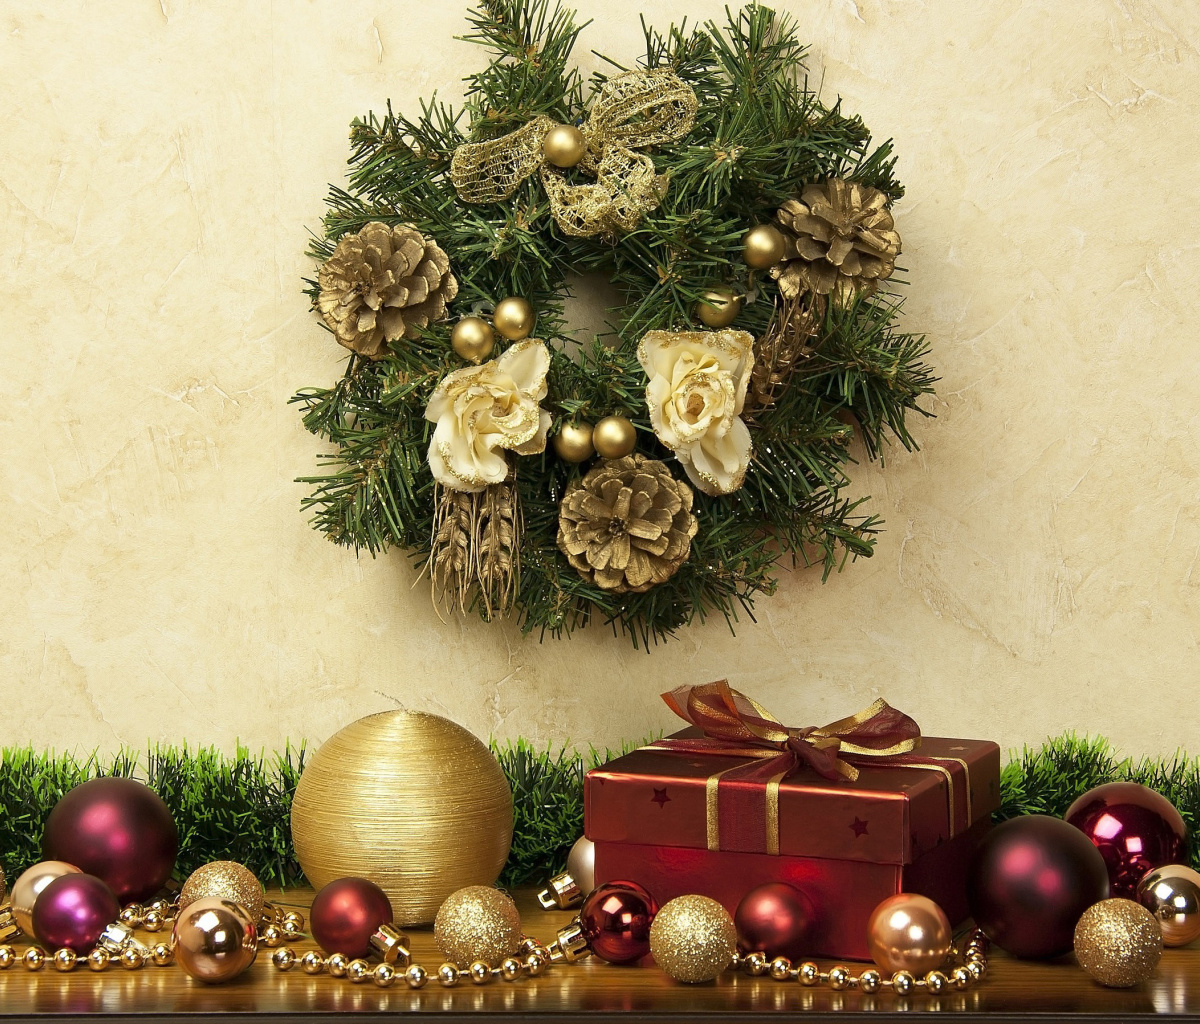 Christmas Decorations Collection wallpaper 1200x1024